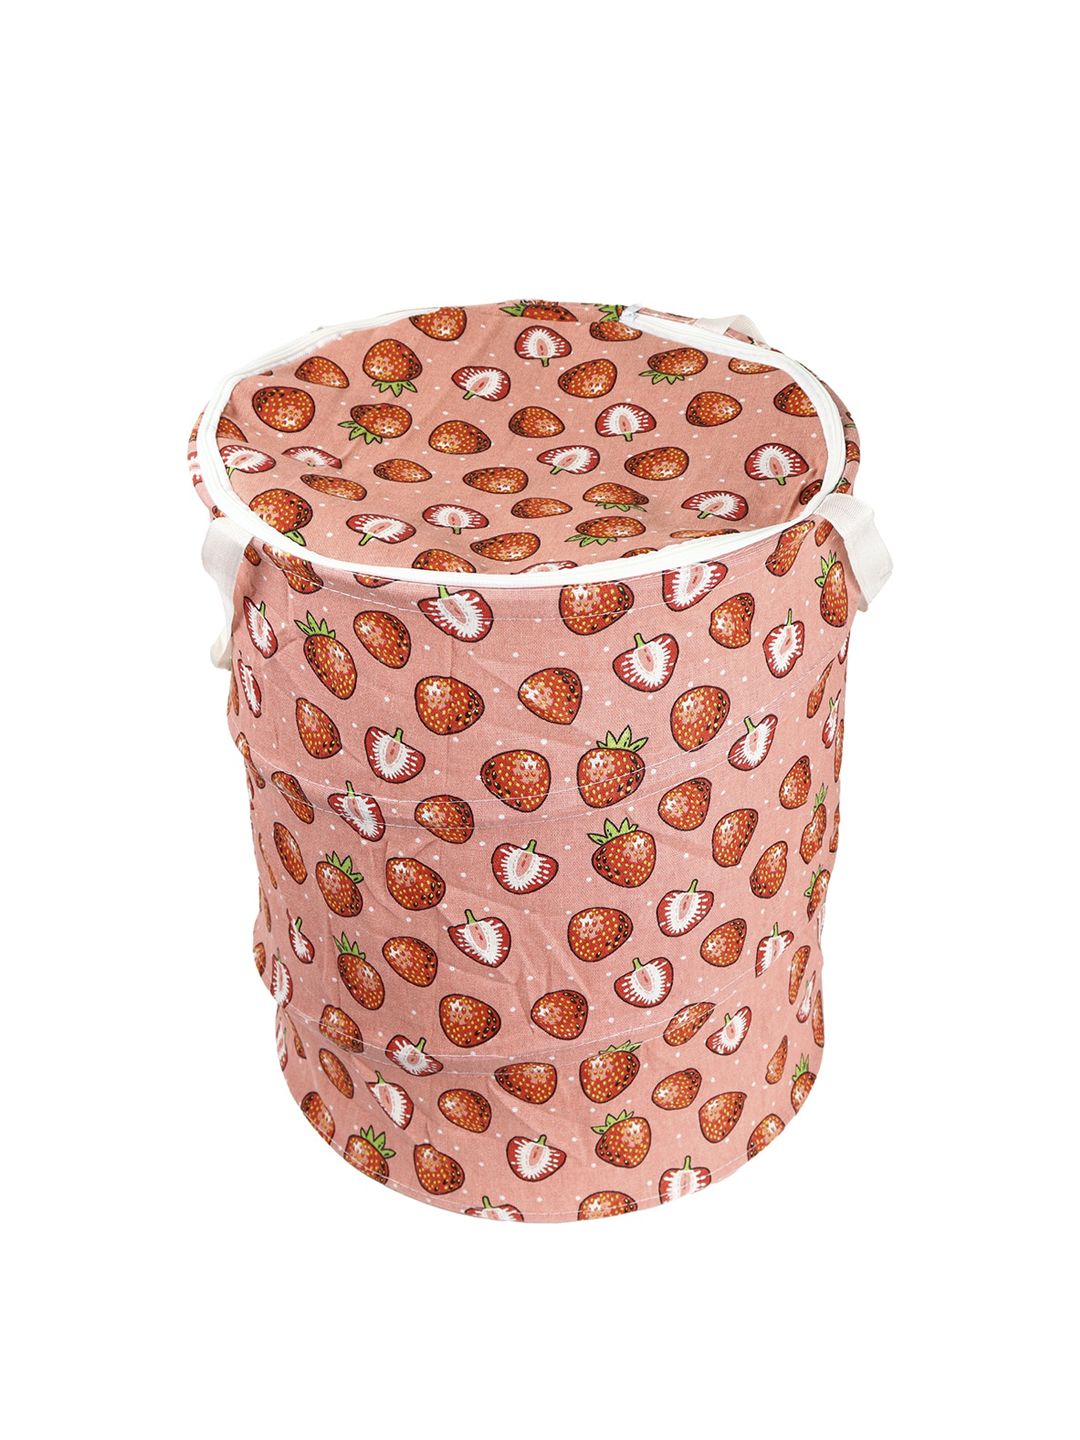 OddCroft Red & White Strawberry Print Foldable Laundry Basket Price in India